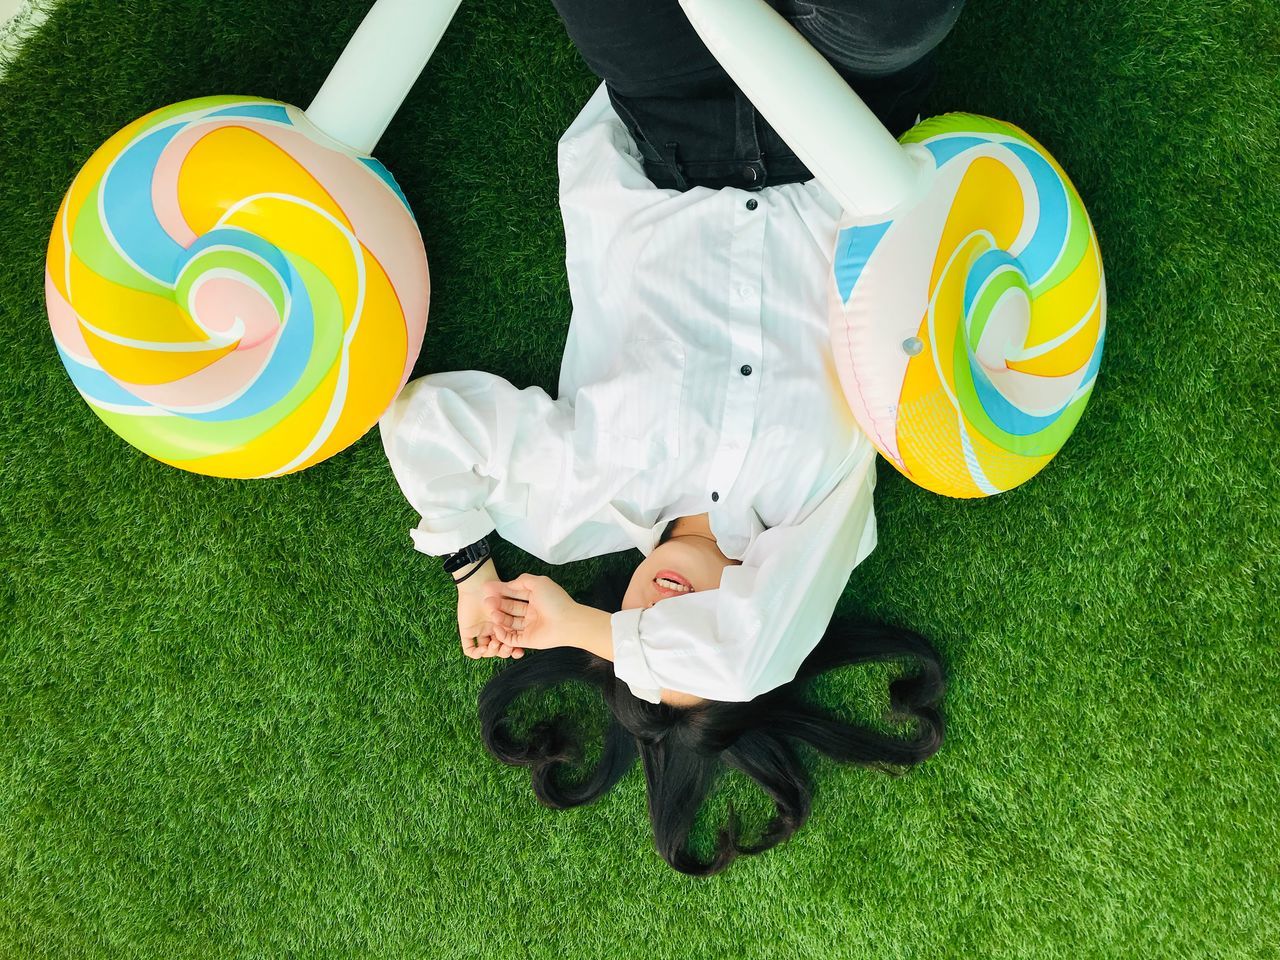 HIGH ANGLE VIEW OF PERSON WITH TOY ON FIELD